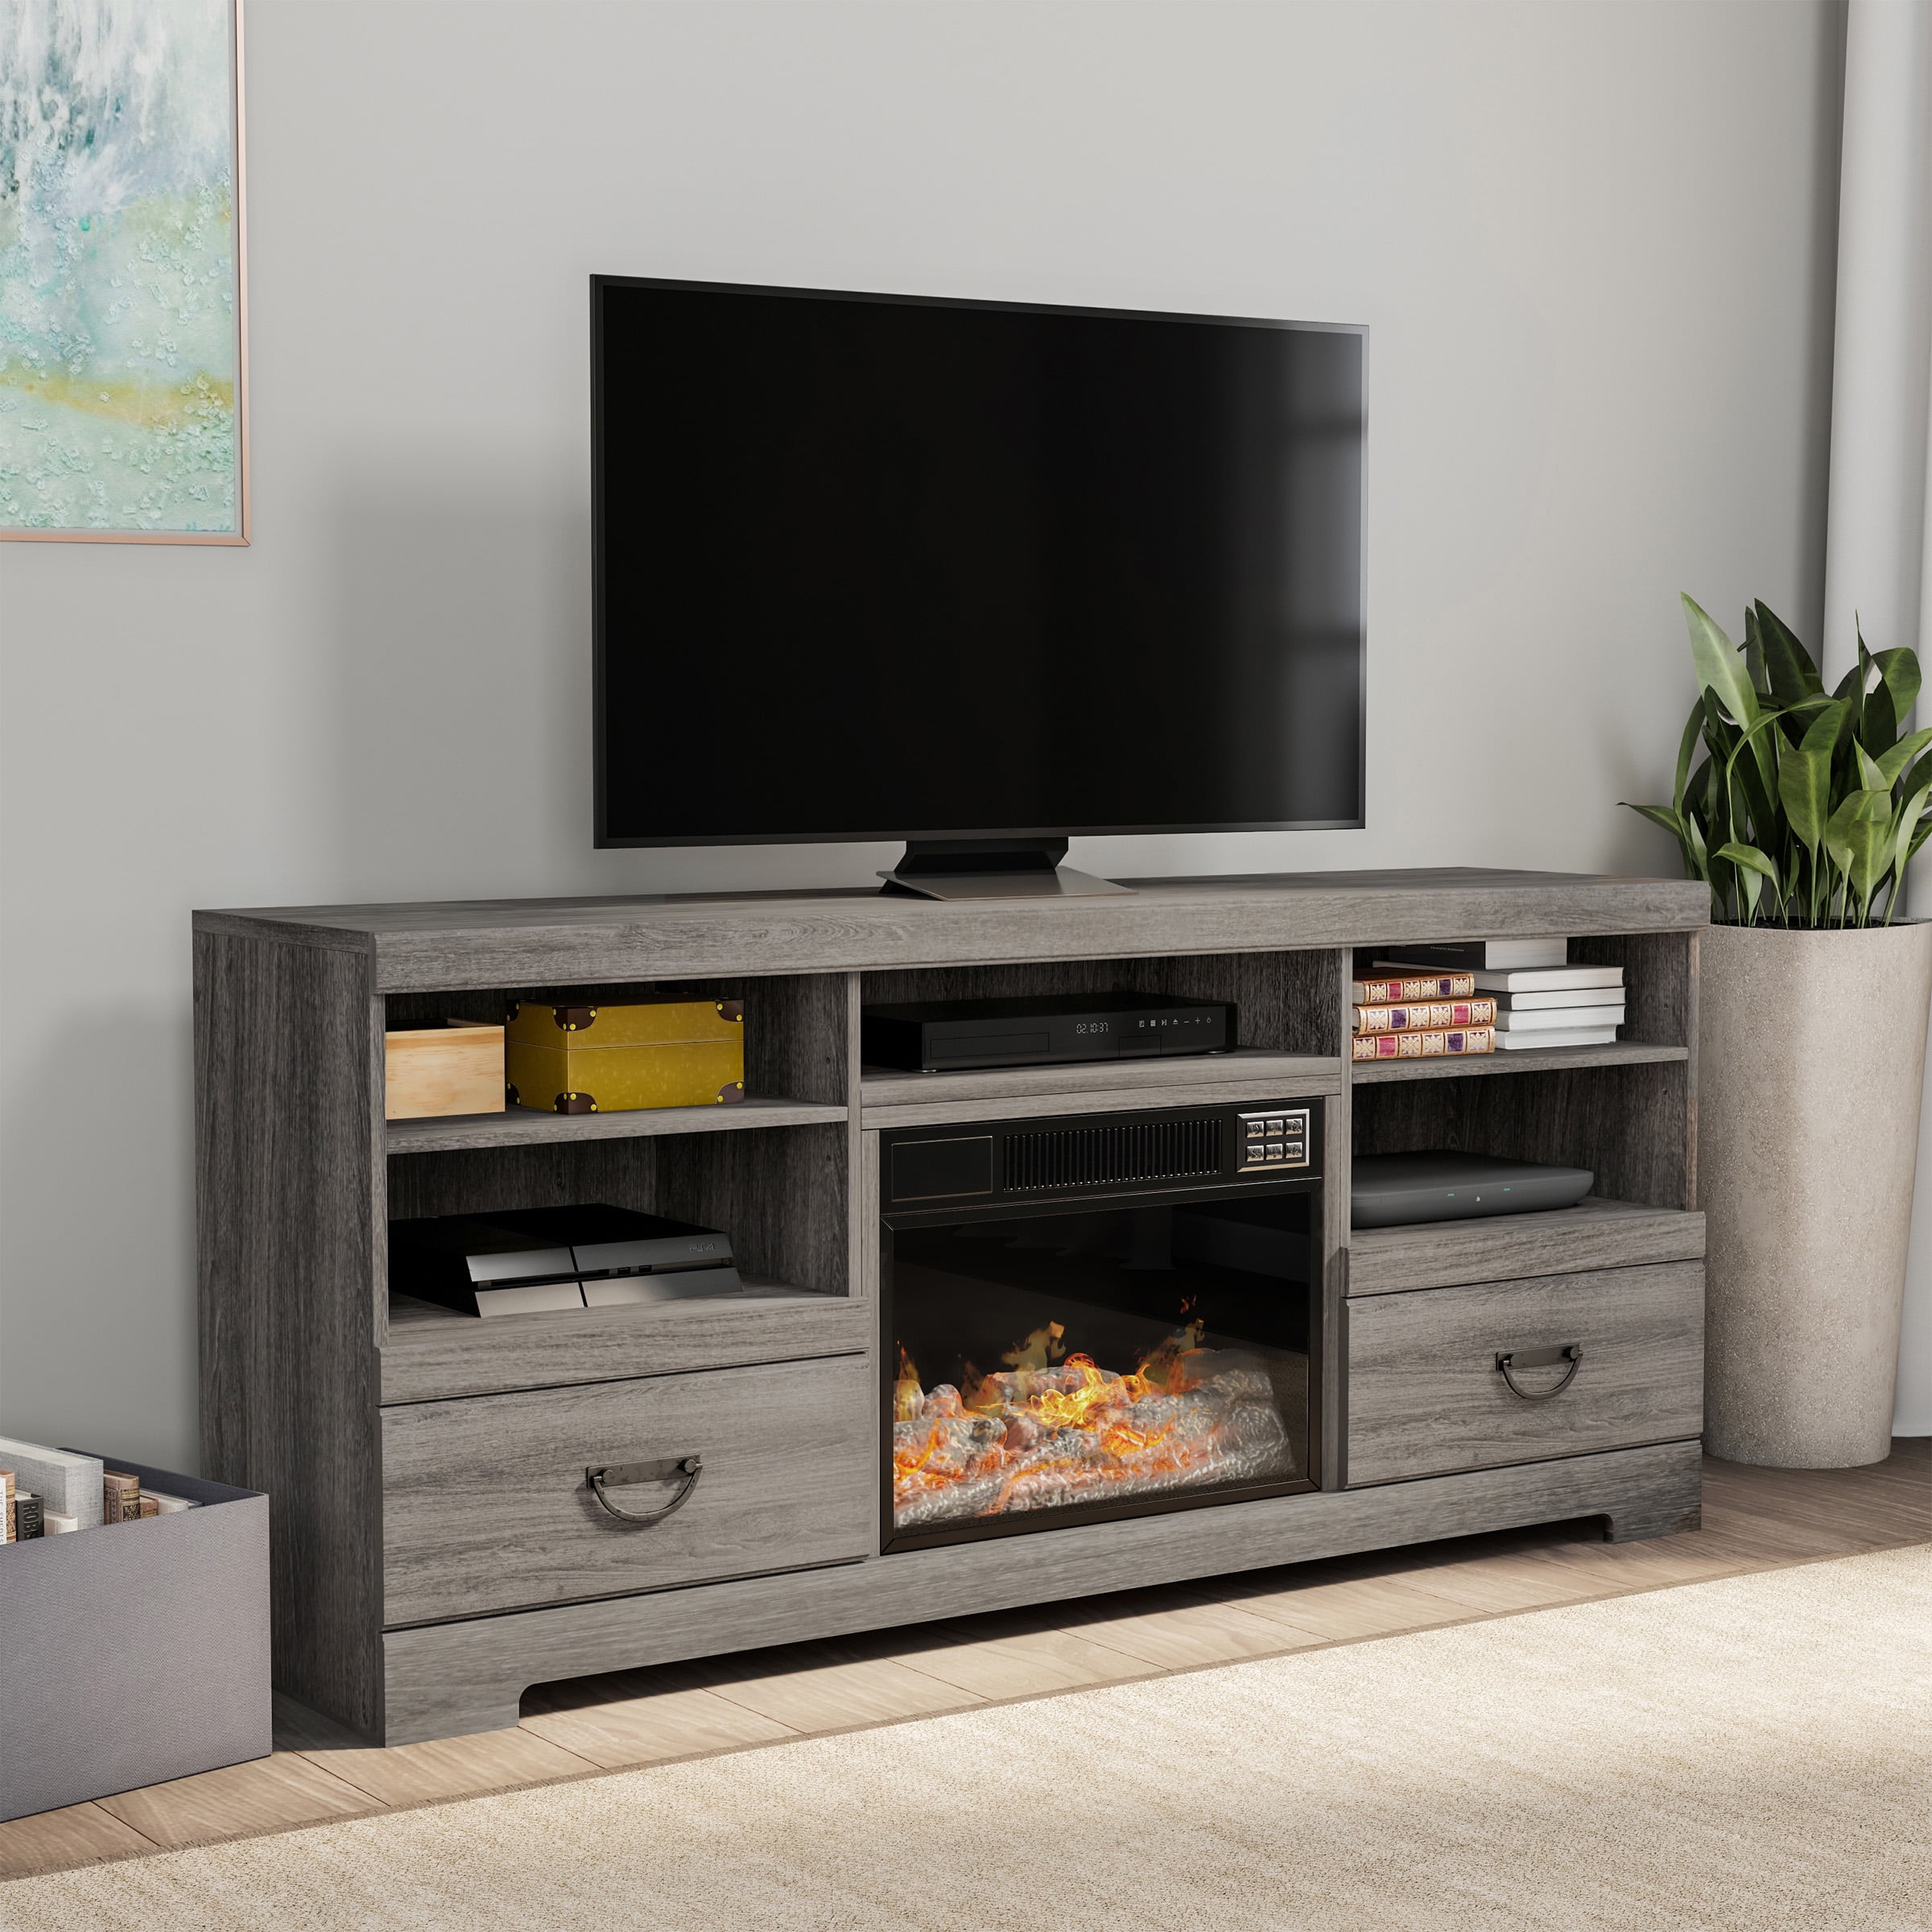 Details about   Electric Fireplace TV Stand entertainment center Console cabinet for 50" TVs 